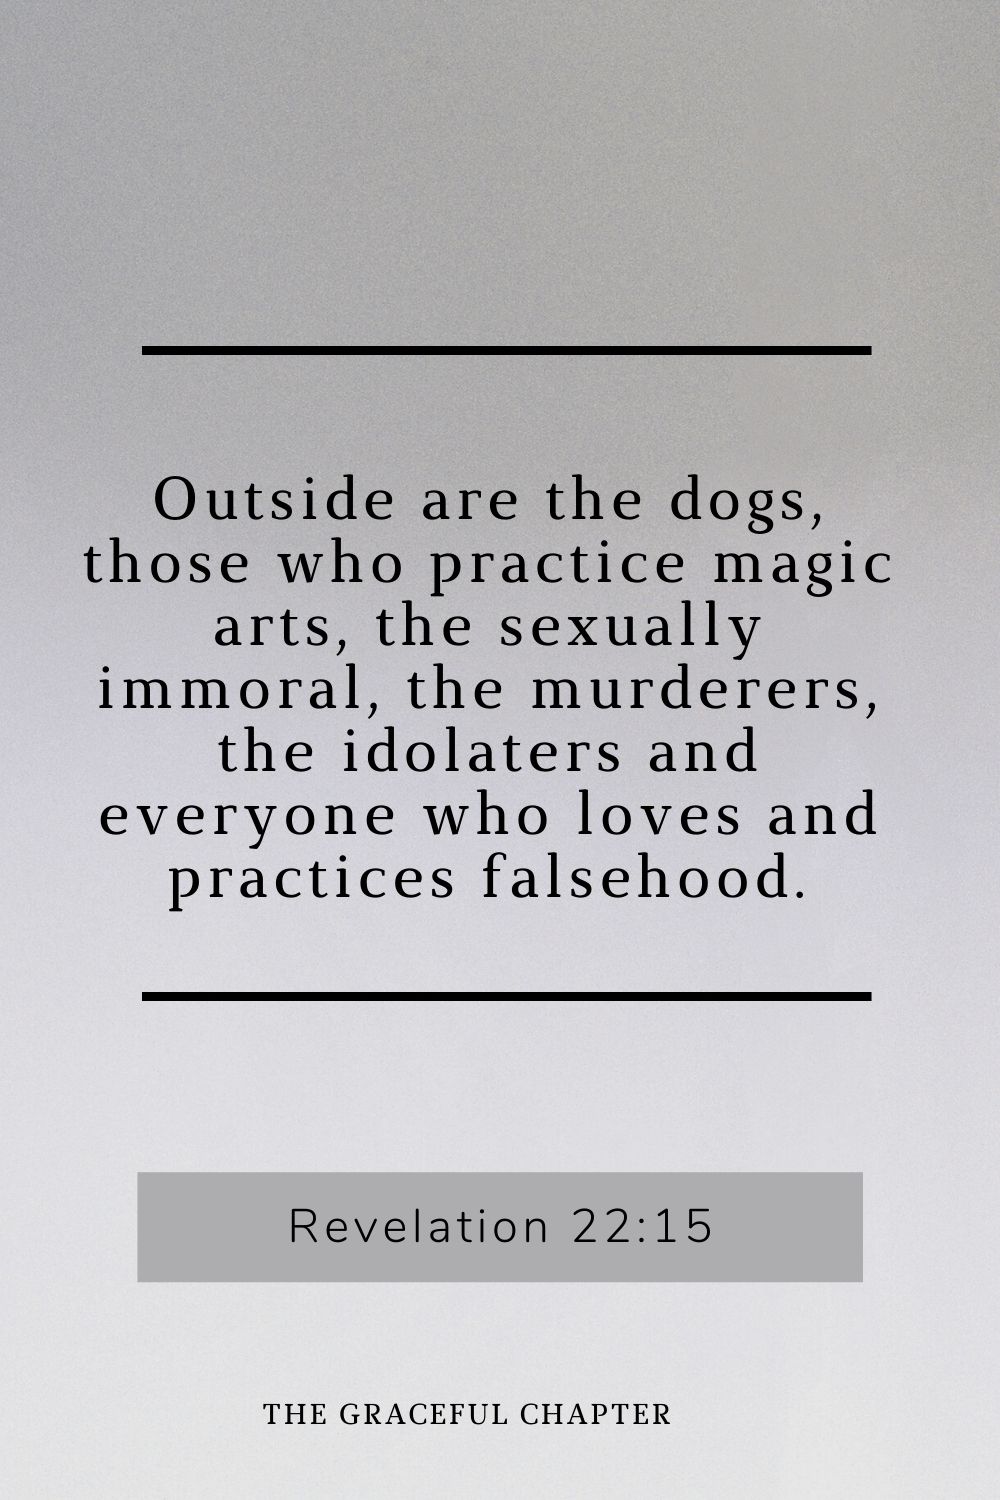 Outside are the dogs, those who practice magic arts, the sexually immoral, the murderers, the idolaters and everyone who loves and practices falsehood. Revelation 22:15